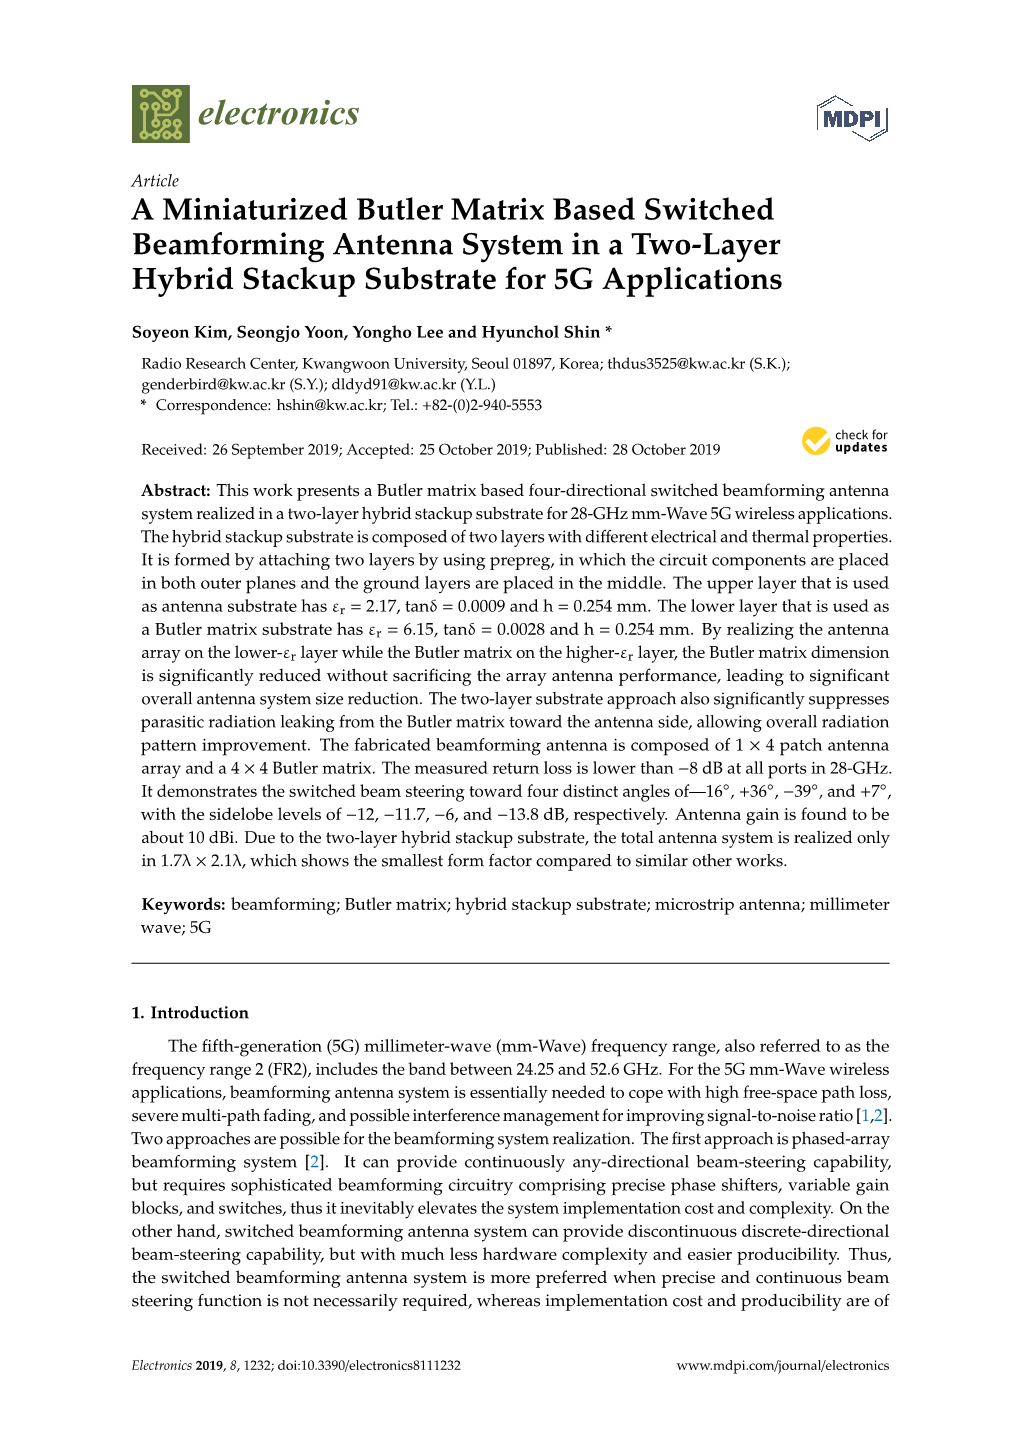 A Miniaturized Butler Matrix Based Switched Beamforming Antenna System in a Two-Layer Hybrid Stackup Substrate for 5G Applications